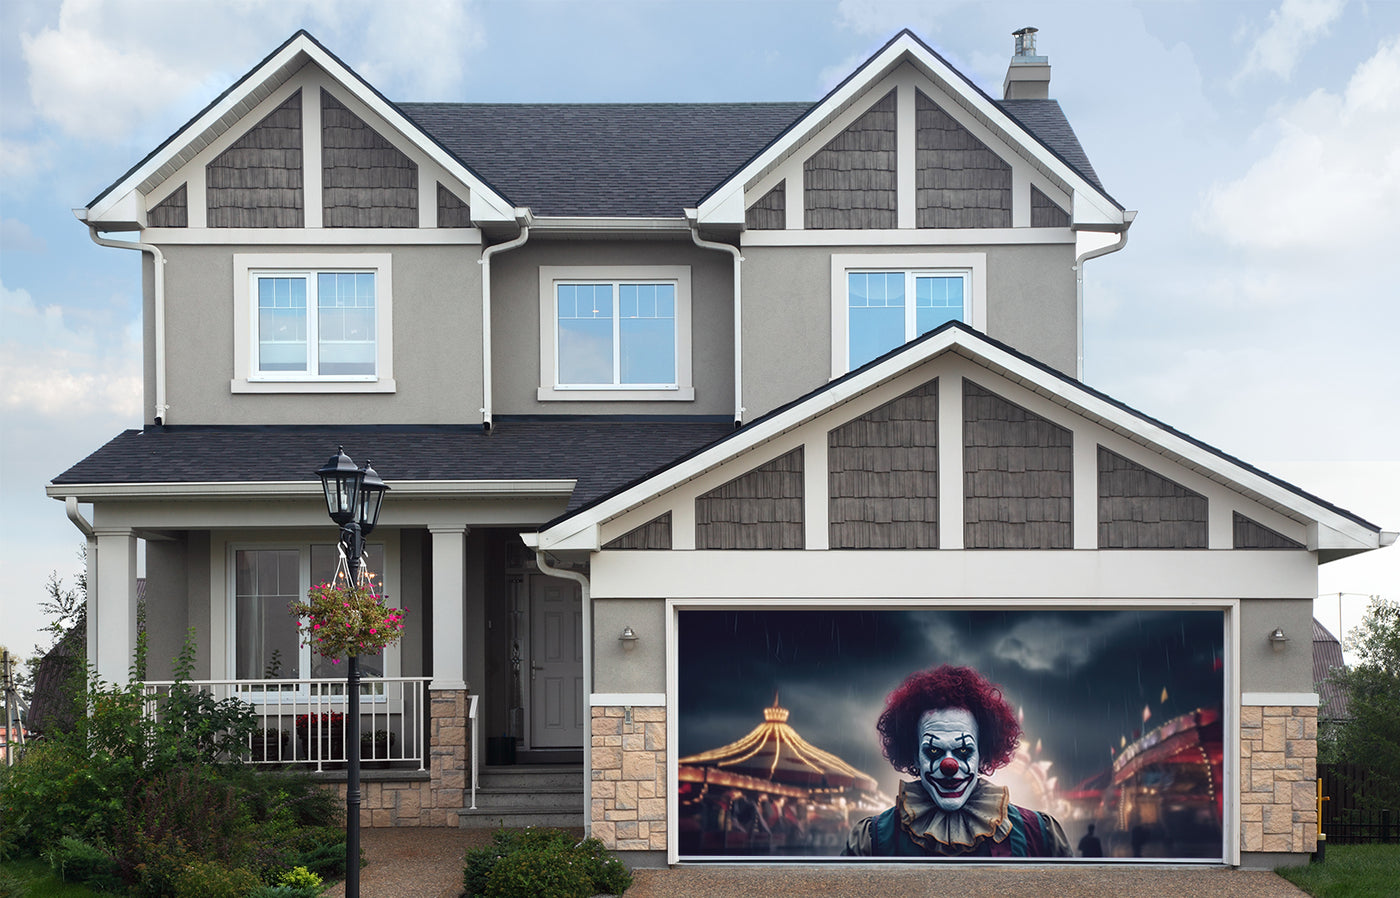 Evil Clown Scary Spooky Clown Monster from Horror Movie with Vintage Circus Garage Door Cover Banner Backdrop